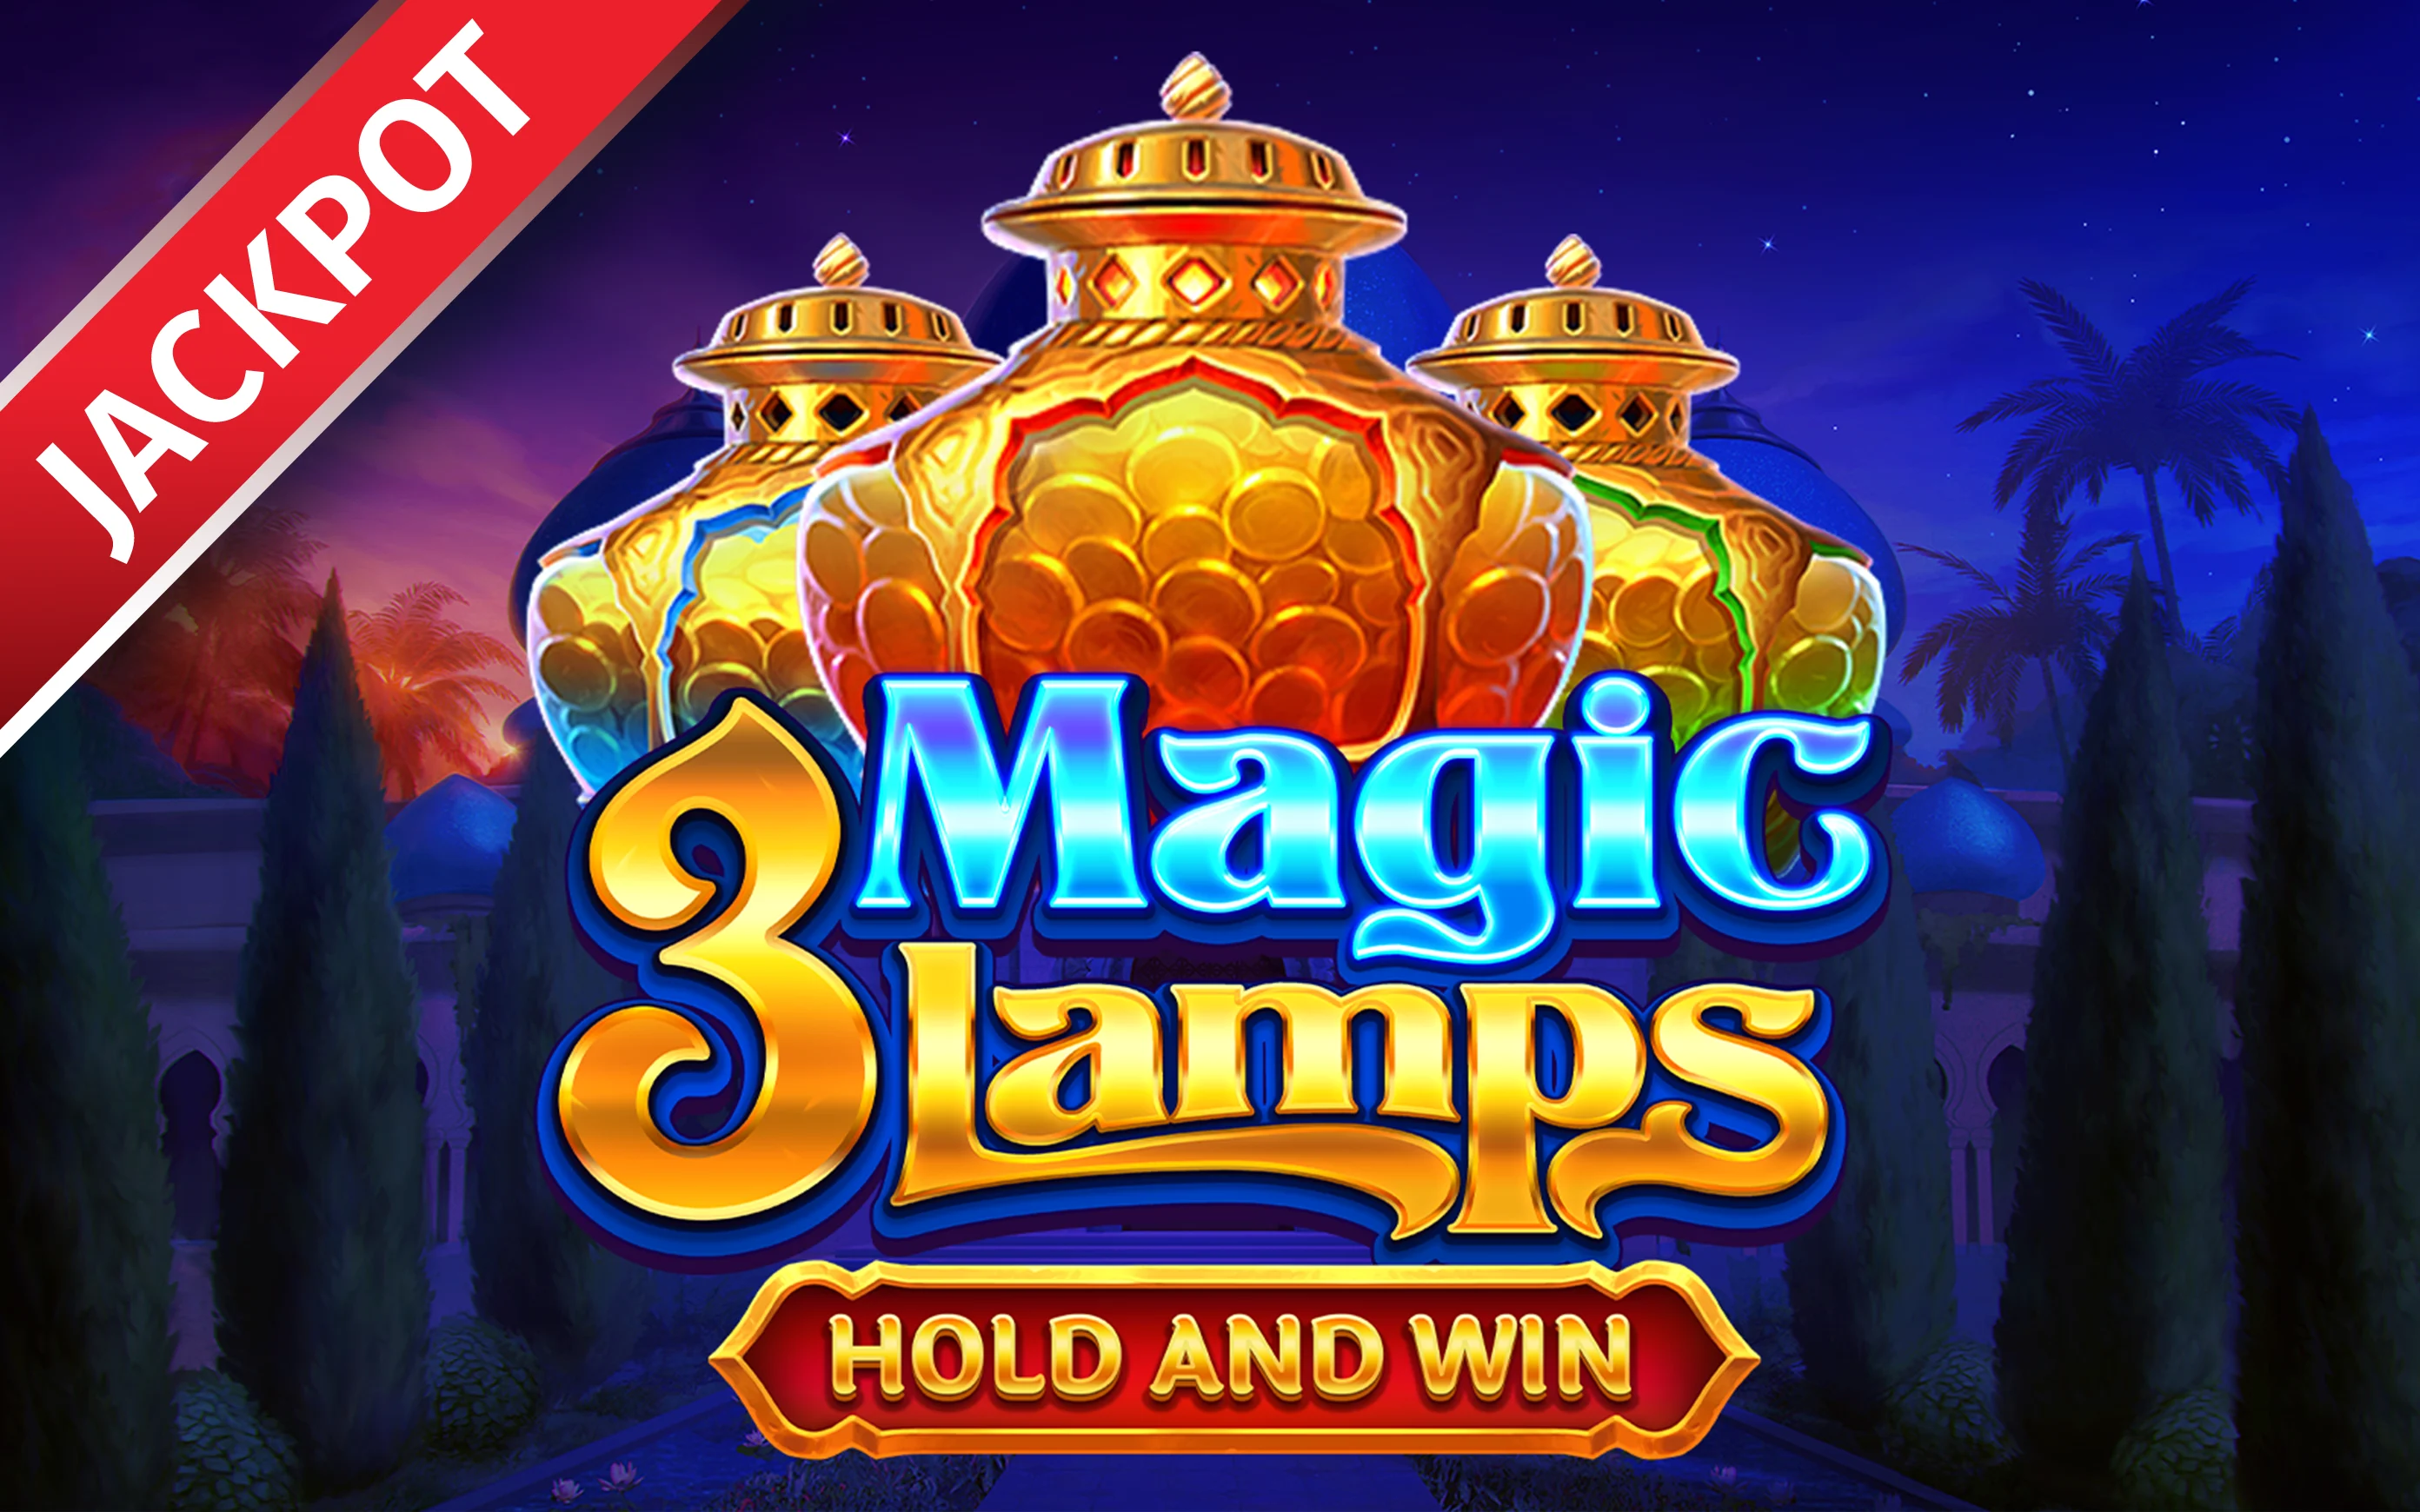 Jogue 3 Magic Lamps: Hold and Win no casino online Starcasino.be 